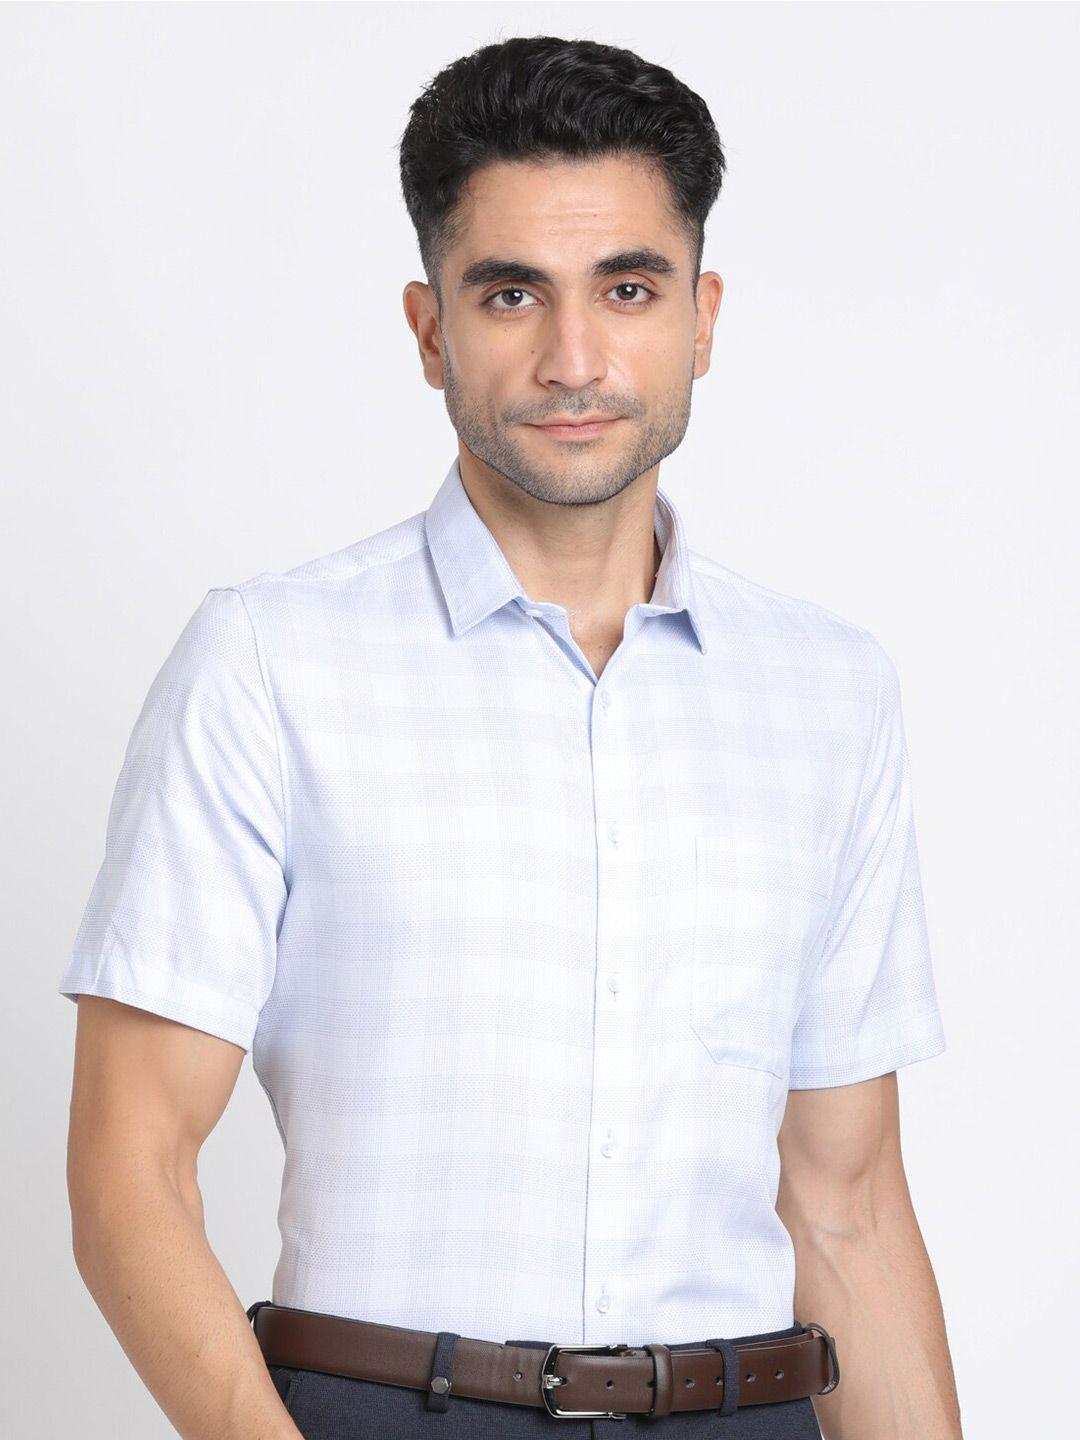 turtle checked modern regular fit pure cotton formal shirt